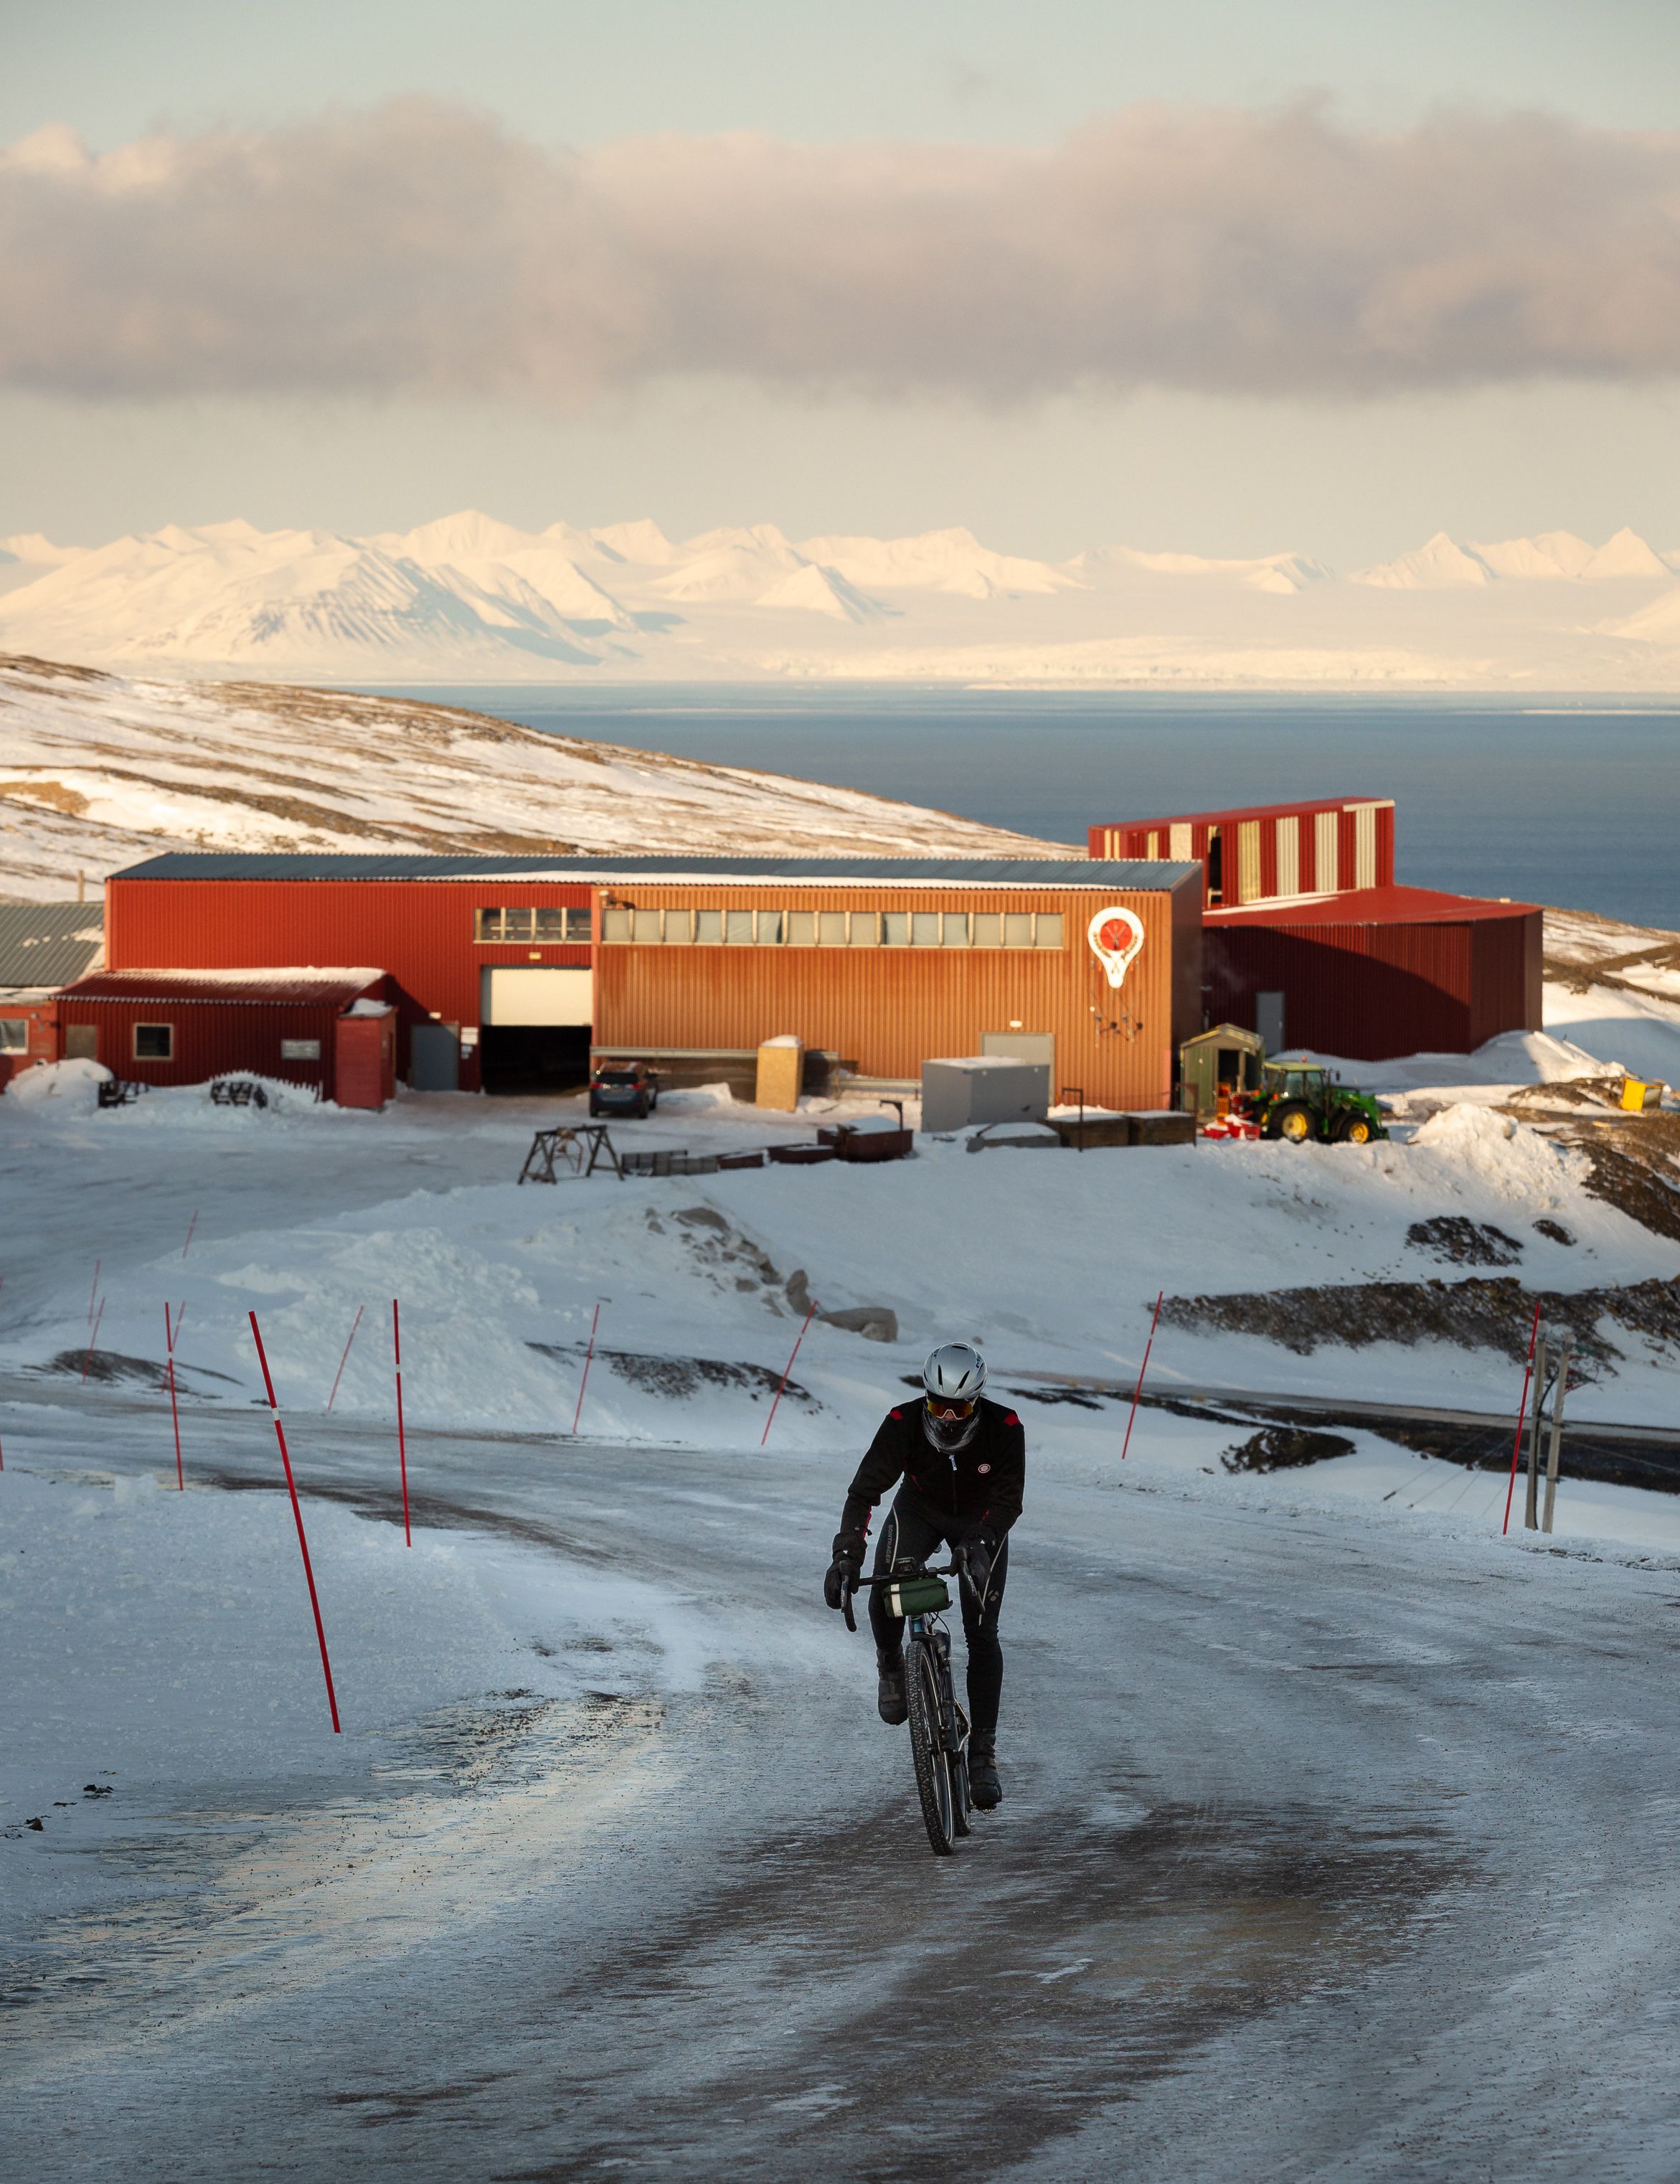 The Svalbard in Norway is a very harsh place for an everesting